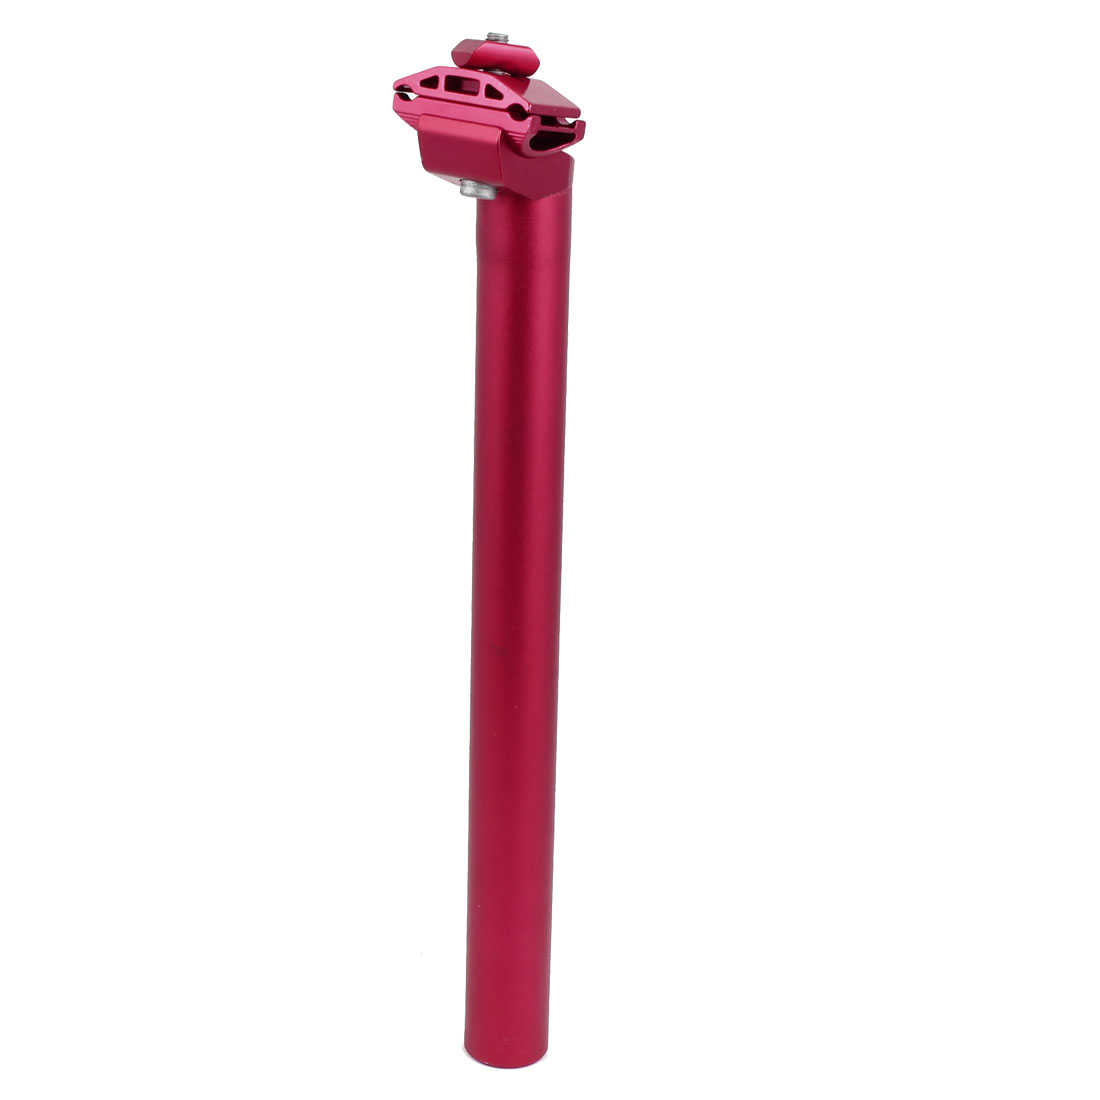 14' Length 1.2' Diameter Red Alloy Handle Seatpost for Bicycle